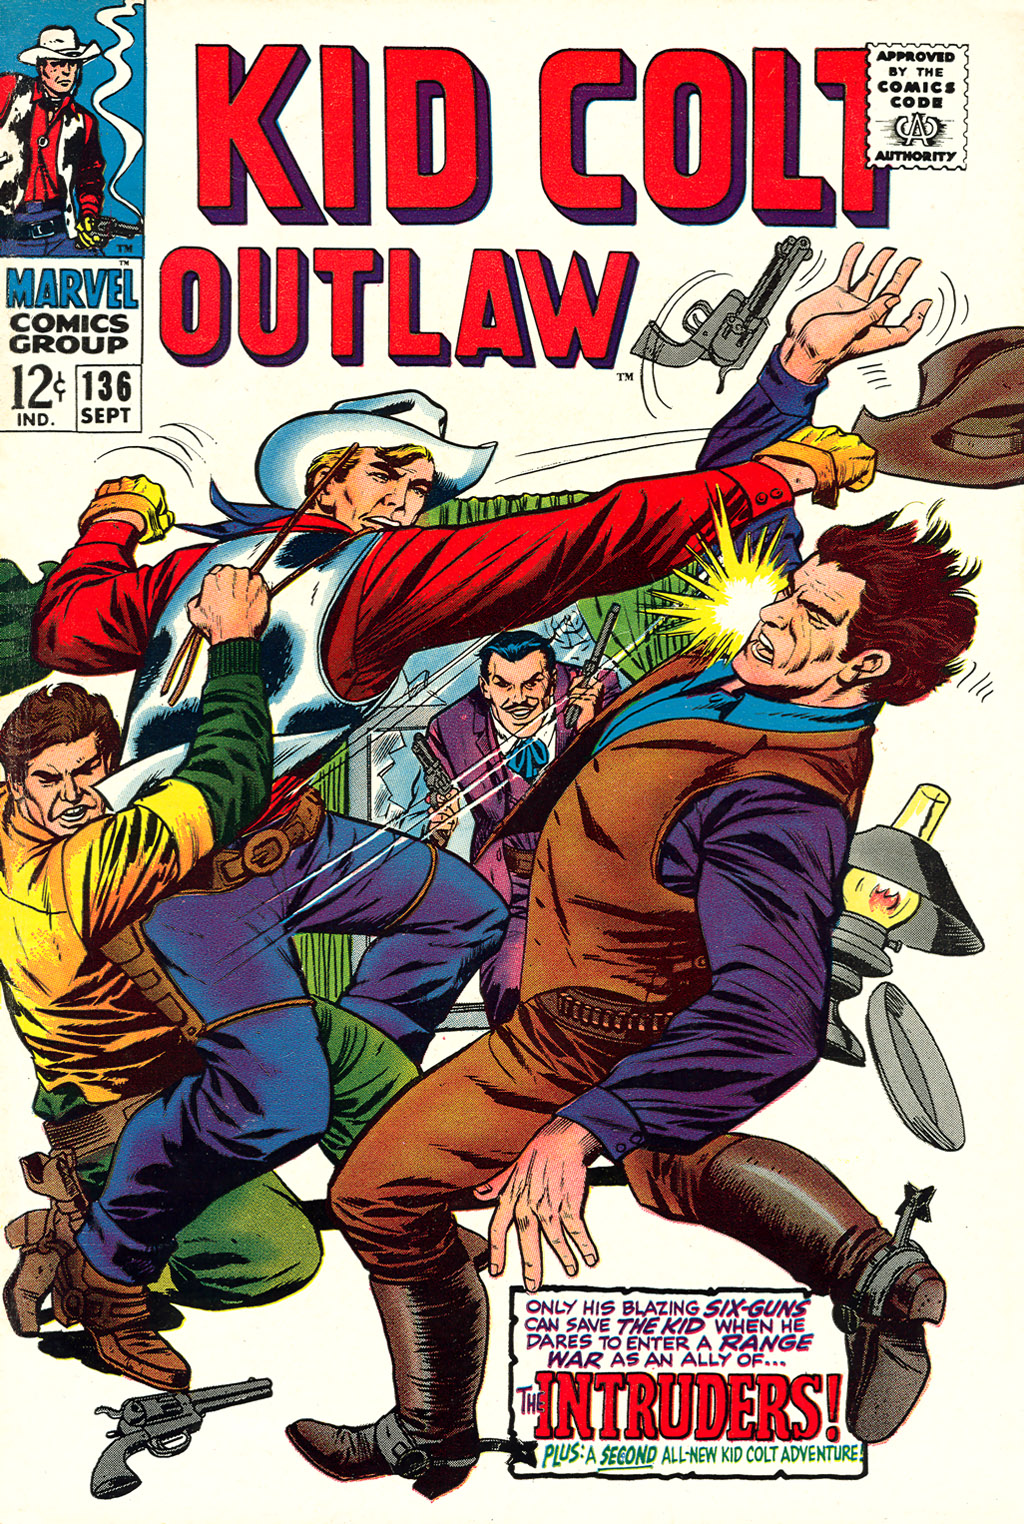 Read online Kid Colt Outlaw comic -  Issue #136 - 1